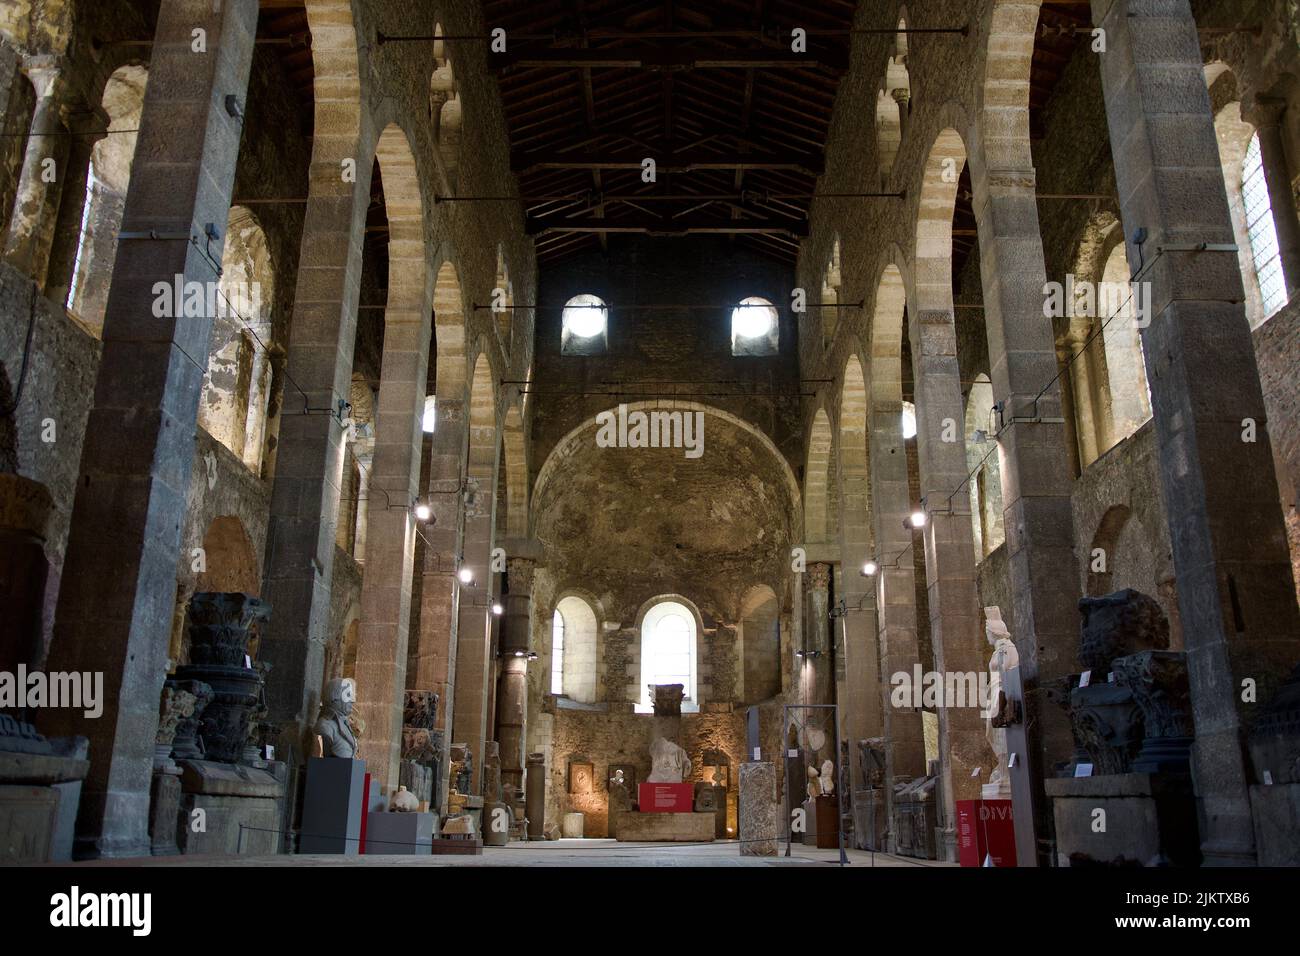 Interior of The Saint Peter church in Vienne in France. This is one of the oldest and it is from the 5th century AD. Today this is a lapidary museum. Stock Photo